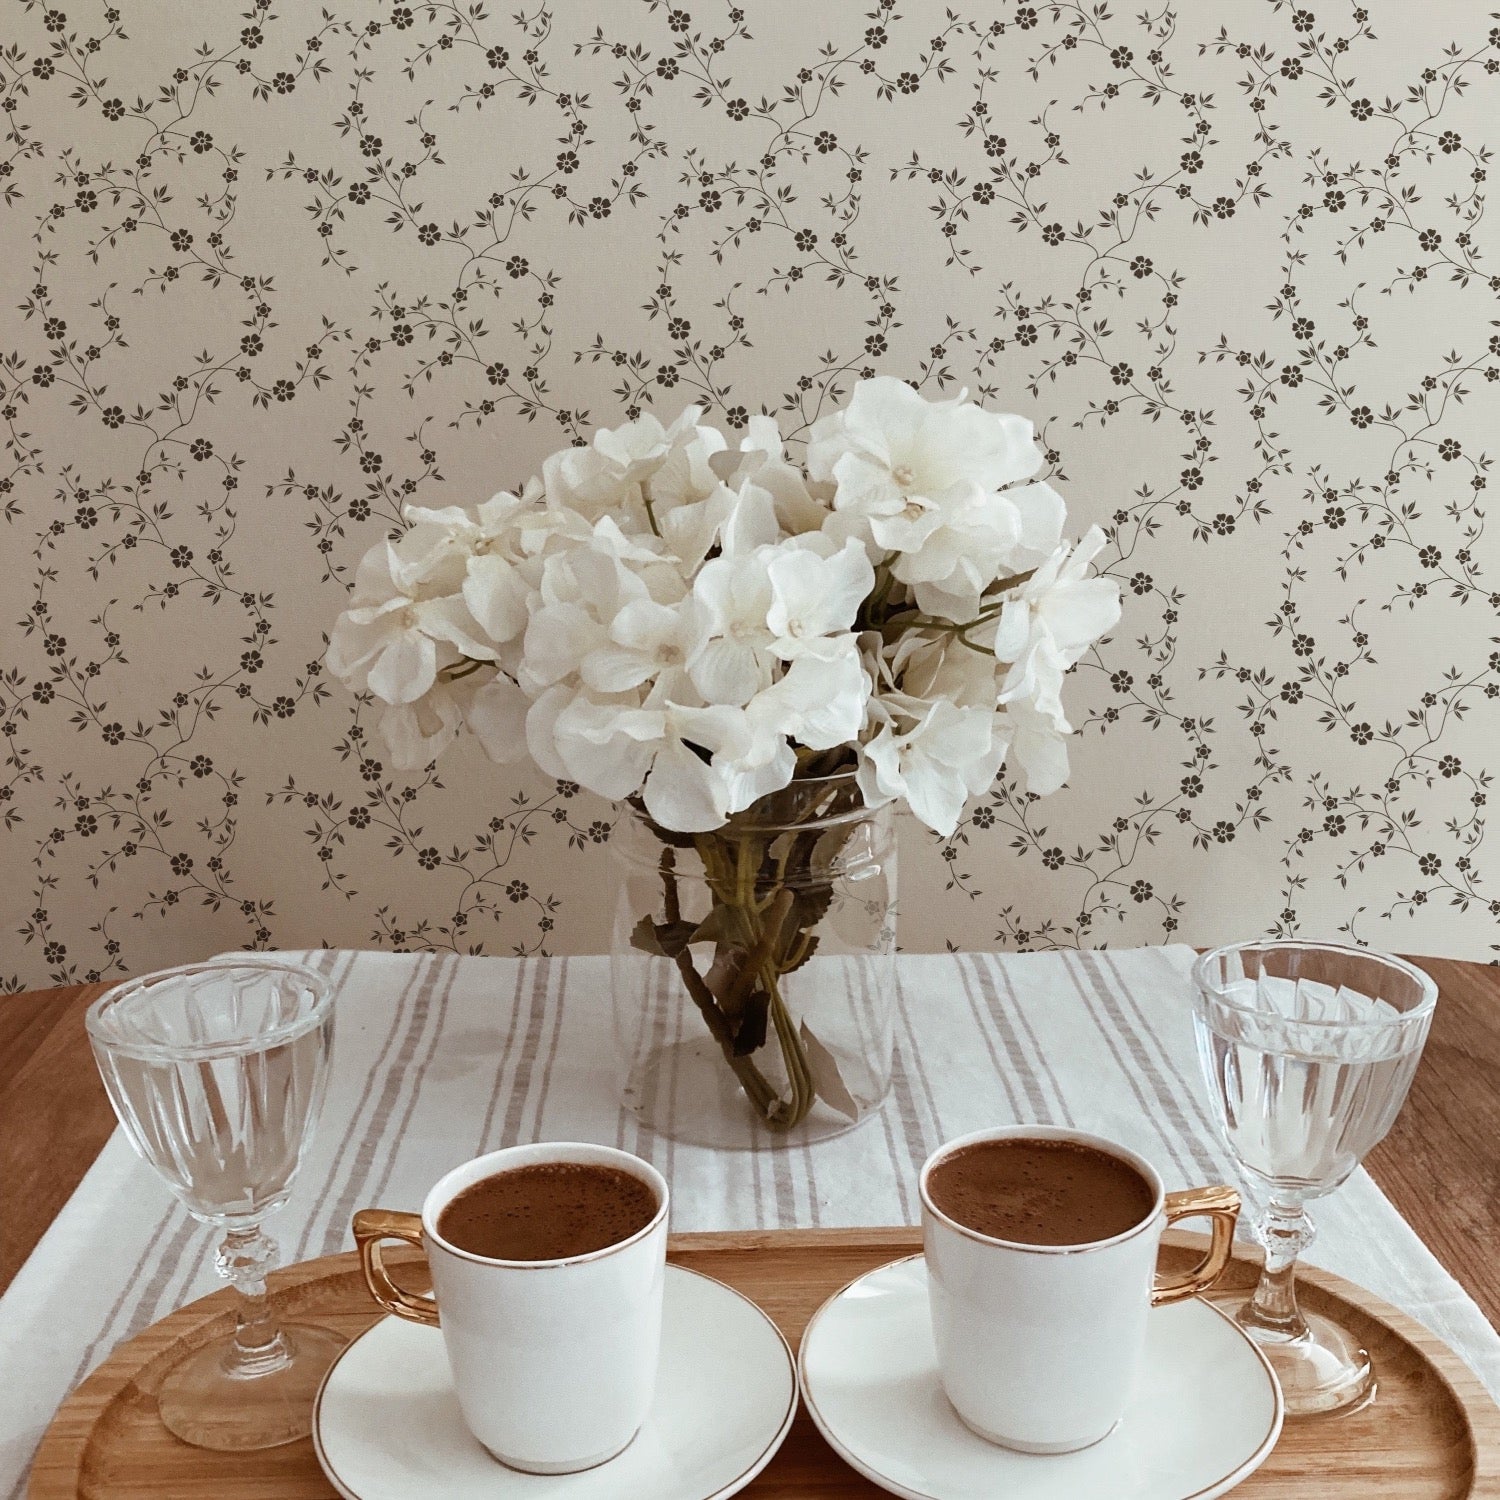 An inviting dining scene featuring the "Mini Charming Floral Wallpaper - Deep Brown" on the wall. The charming floral pattern provides a quaint backdrop for a simple wooden dining table with a glass vase of white hydrangeas, two cups of coffee, and elegant glass stemware, highlighting the wallpaper's ability to enhance a homely dining experience.